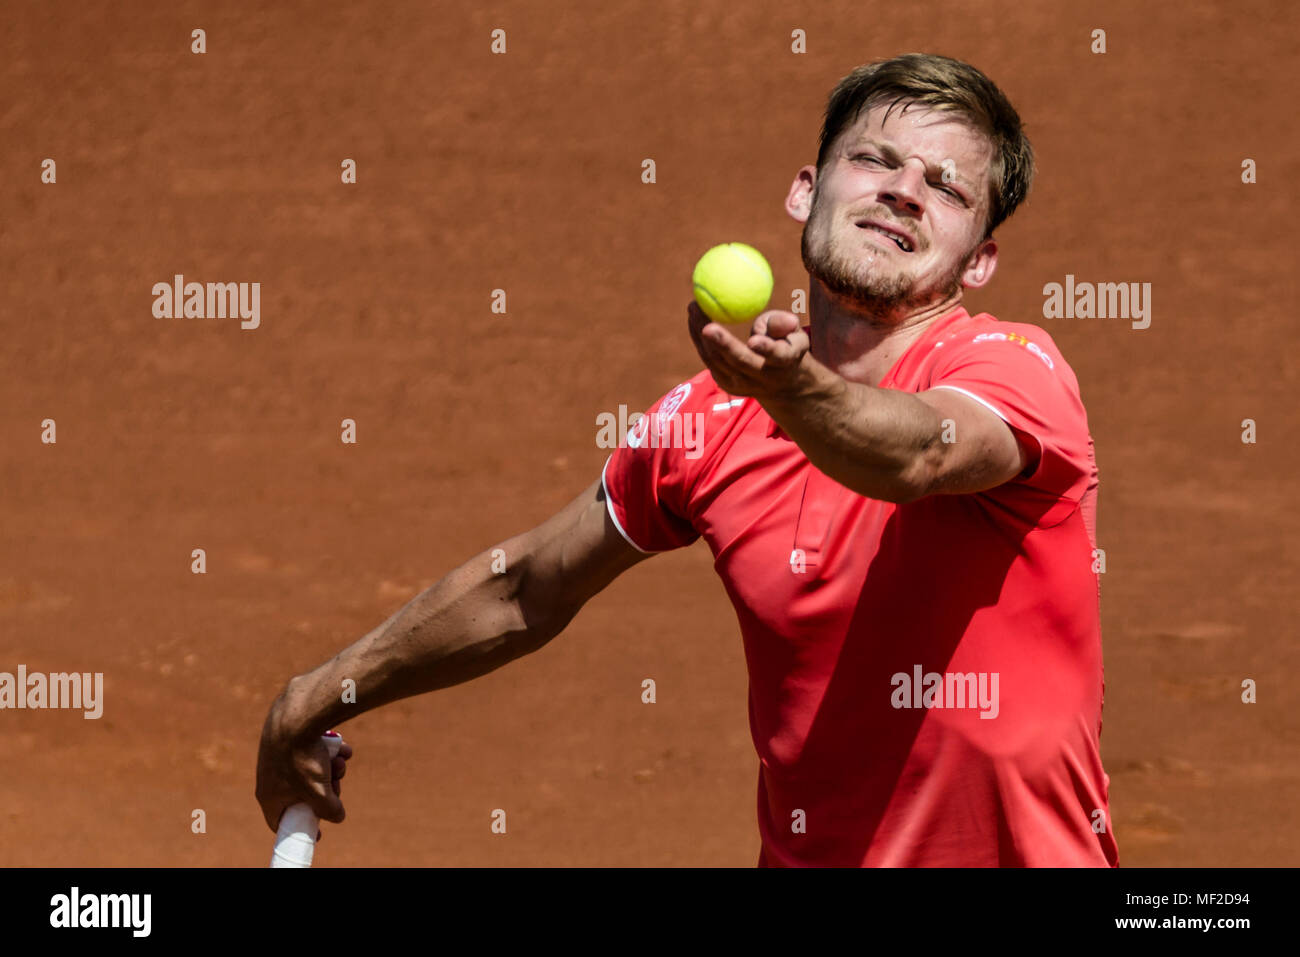 Barcelona, Spain. 24 April, 2018:  DAVID GOFFIN (BEL)  serves against Marcel Granollers (ESP) during Day 2 of the 'Barcelona Open Banc Sabadell' 2018. 4:6, 7:6, 6:2 Credit: Matthias Oesterle/Alamy Live News Stock Photo